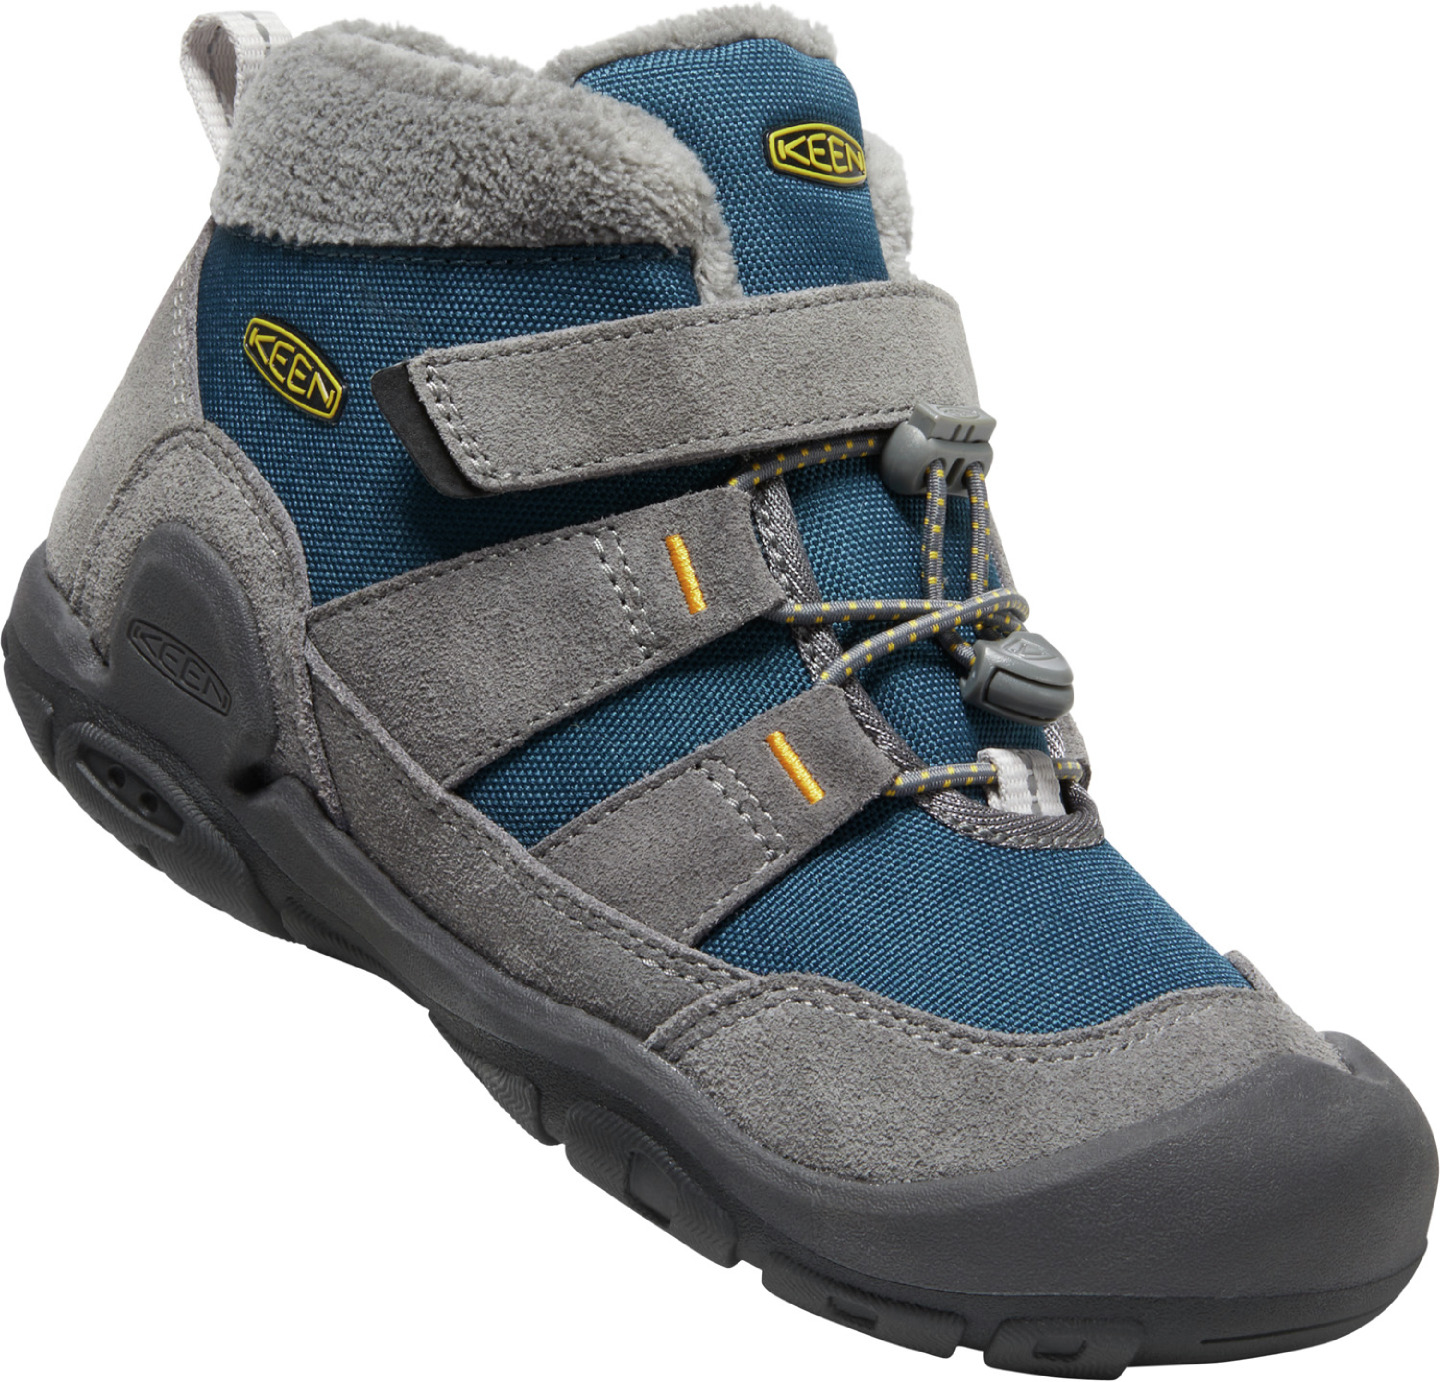 Keen KNOTCH CHUKKA YOUTH steel grey/blue wing teal Velikost: 36 boty